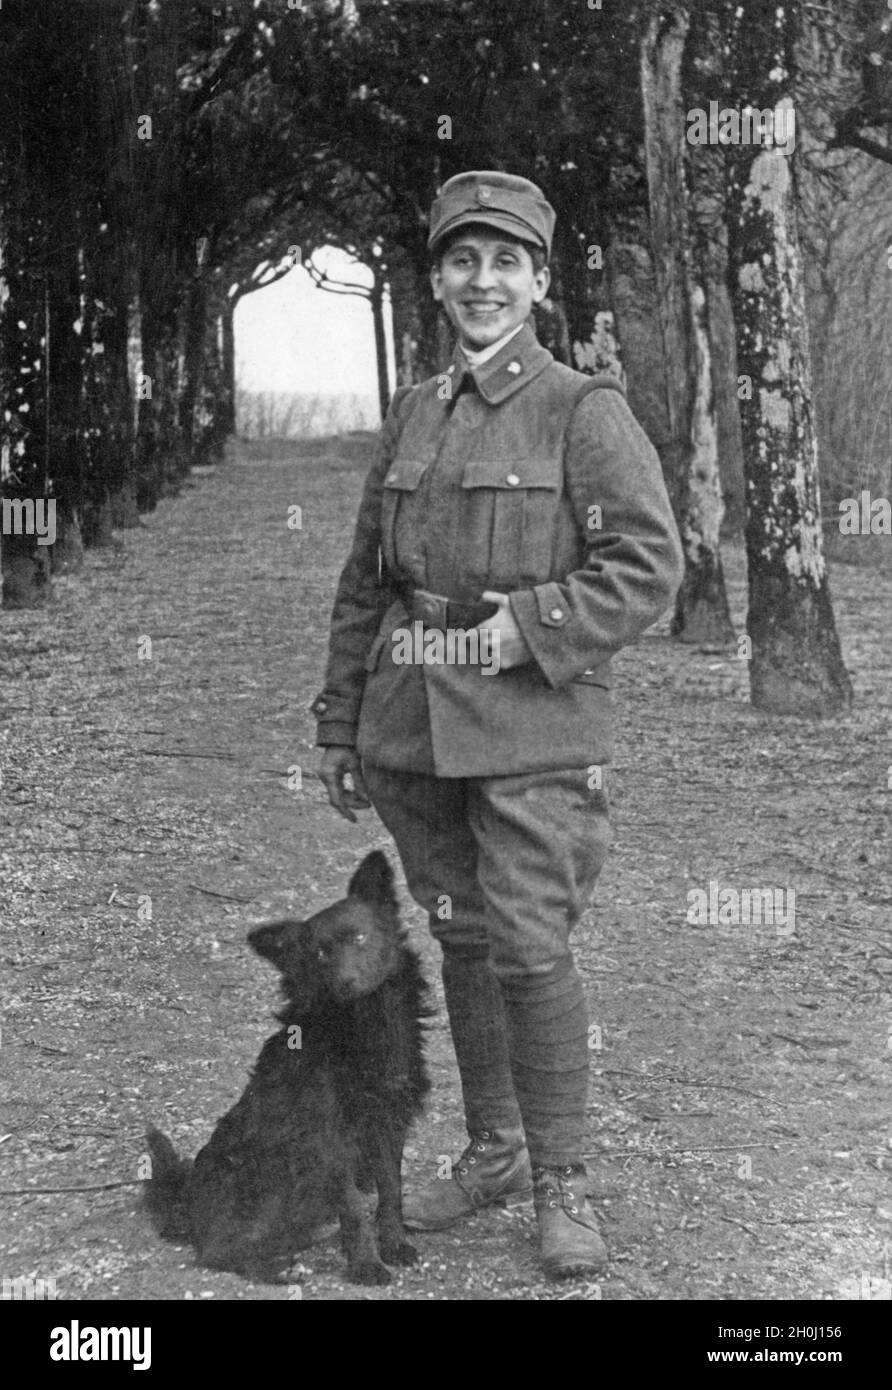 'Senta Maria Hauler, daughter of an Austrian officer, as a rifleman ''Wolf Hauler'' during the Second World War. She was a member of the Württemberg Mountain Battalion and took part in the Italian campaign as an interpreter. [automated translation]' Stock Photo